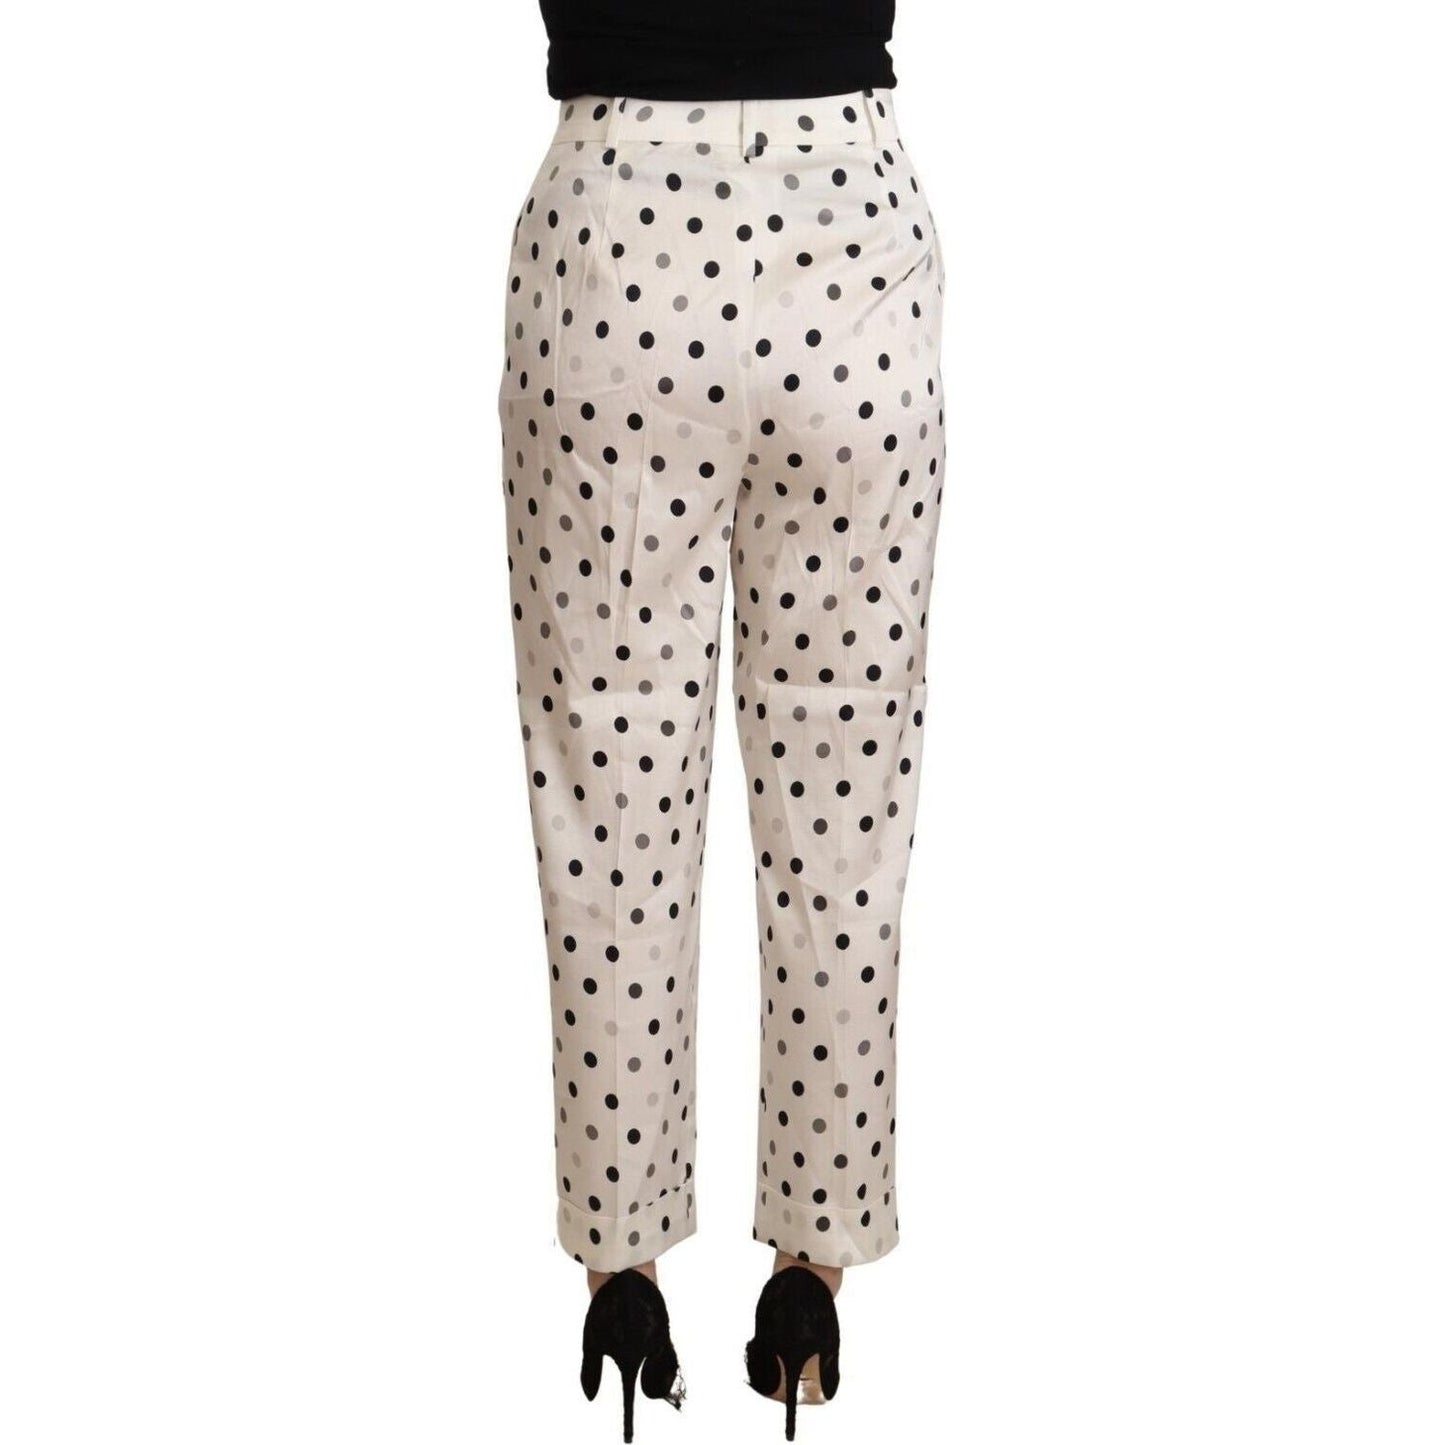 Ermanno Scervino Chic High Waist Polka Dotted Tapered Pants white-polka-dotted-high-waist-tapered-pants